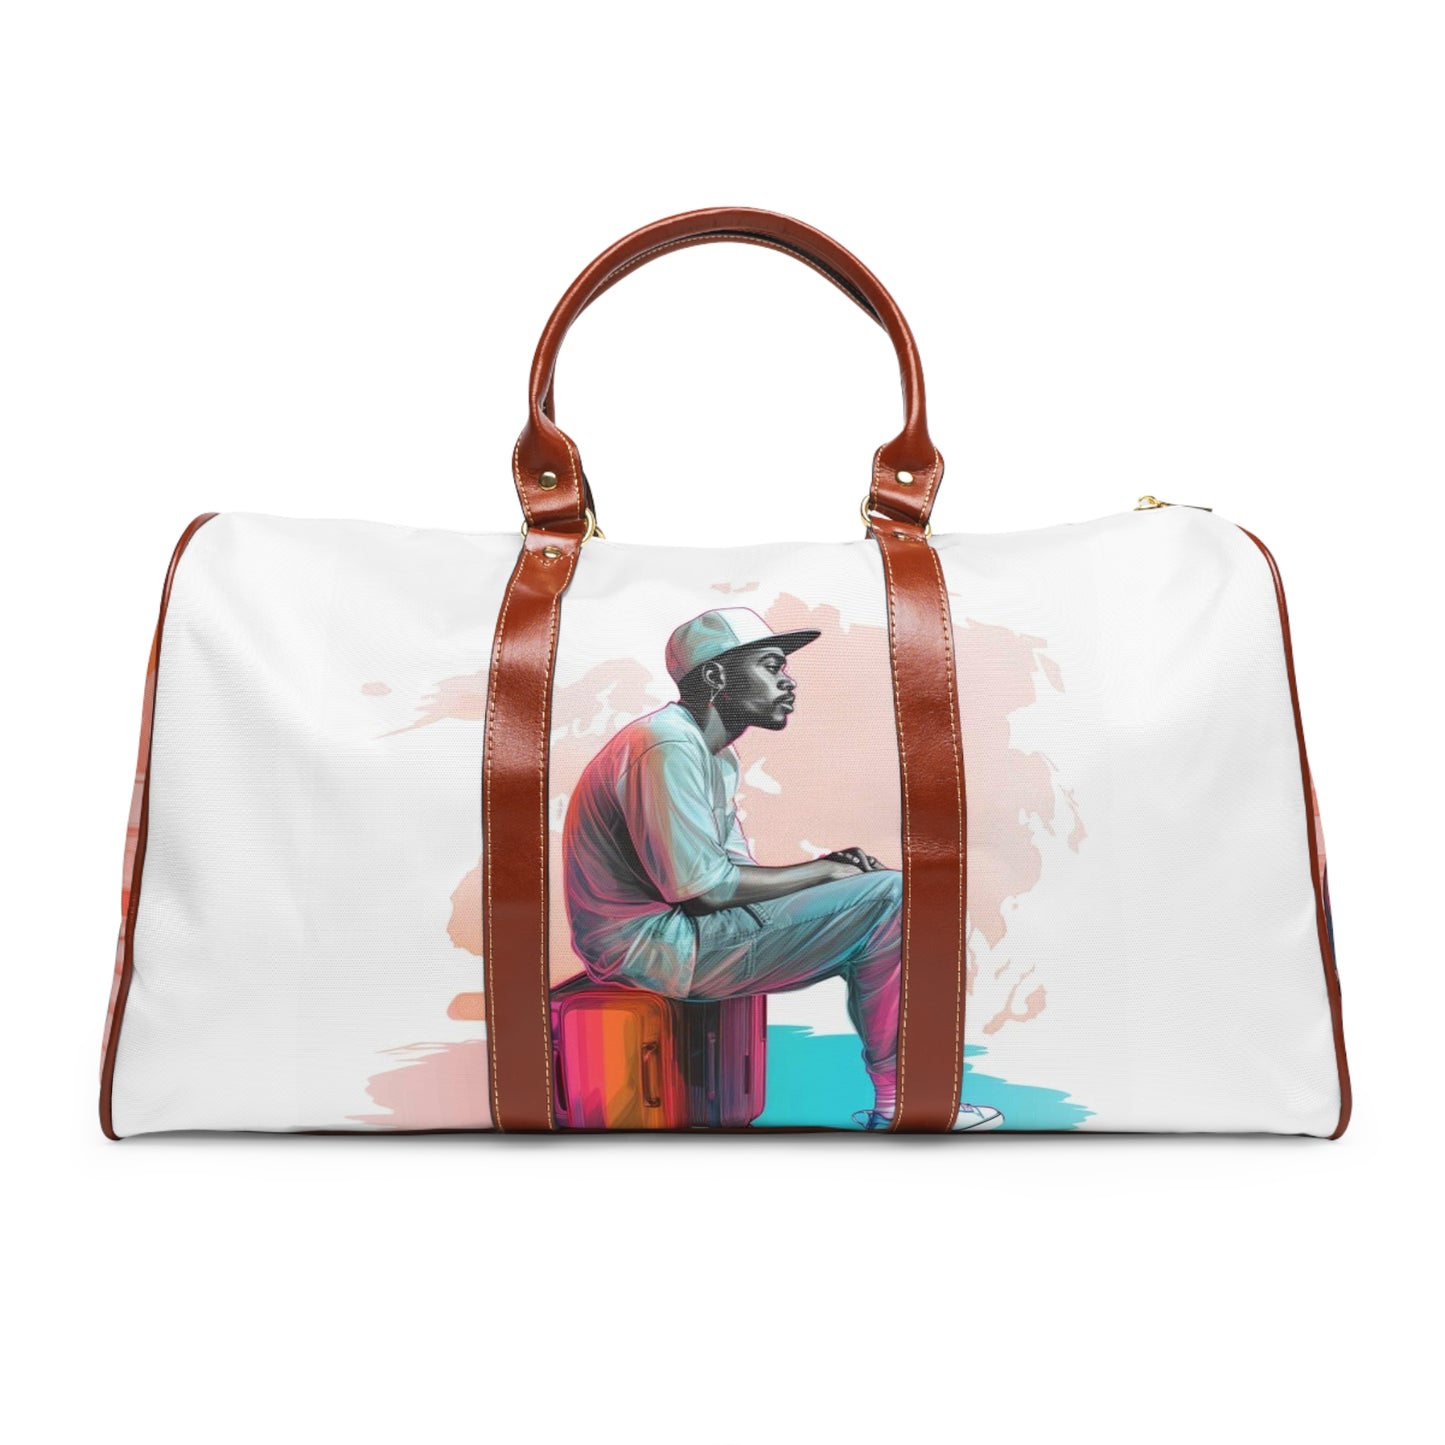 Adventure-Ready: Waterproof Travel Bag with Stylish Designs For The Adventurous Man (WHITE)